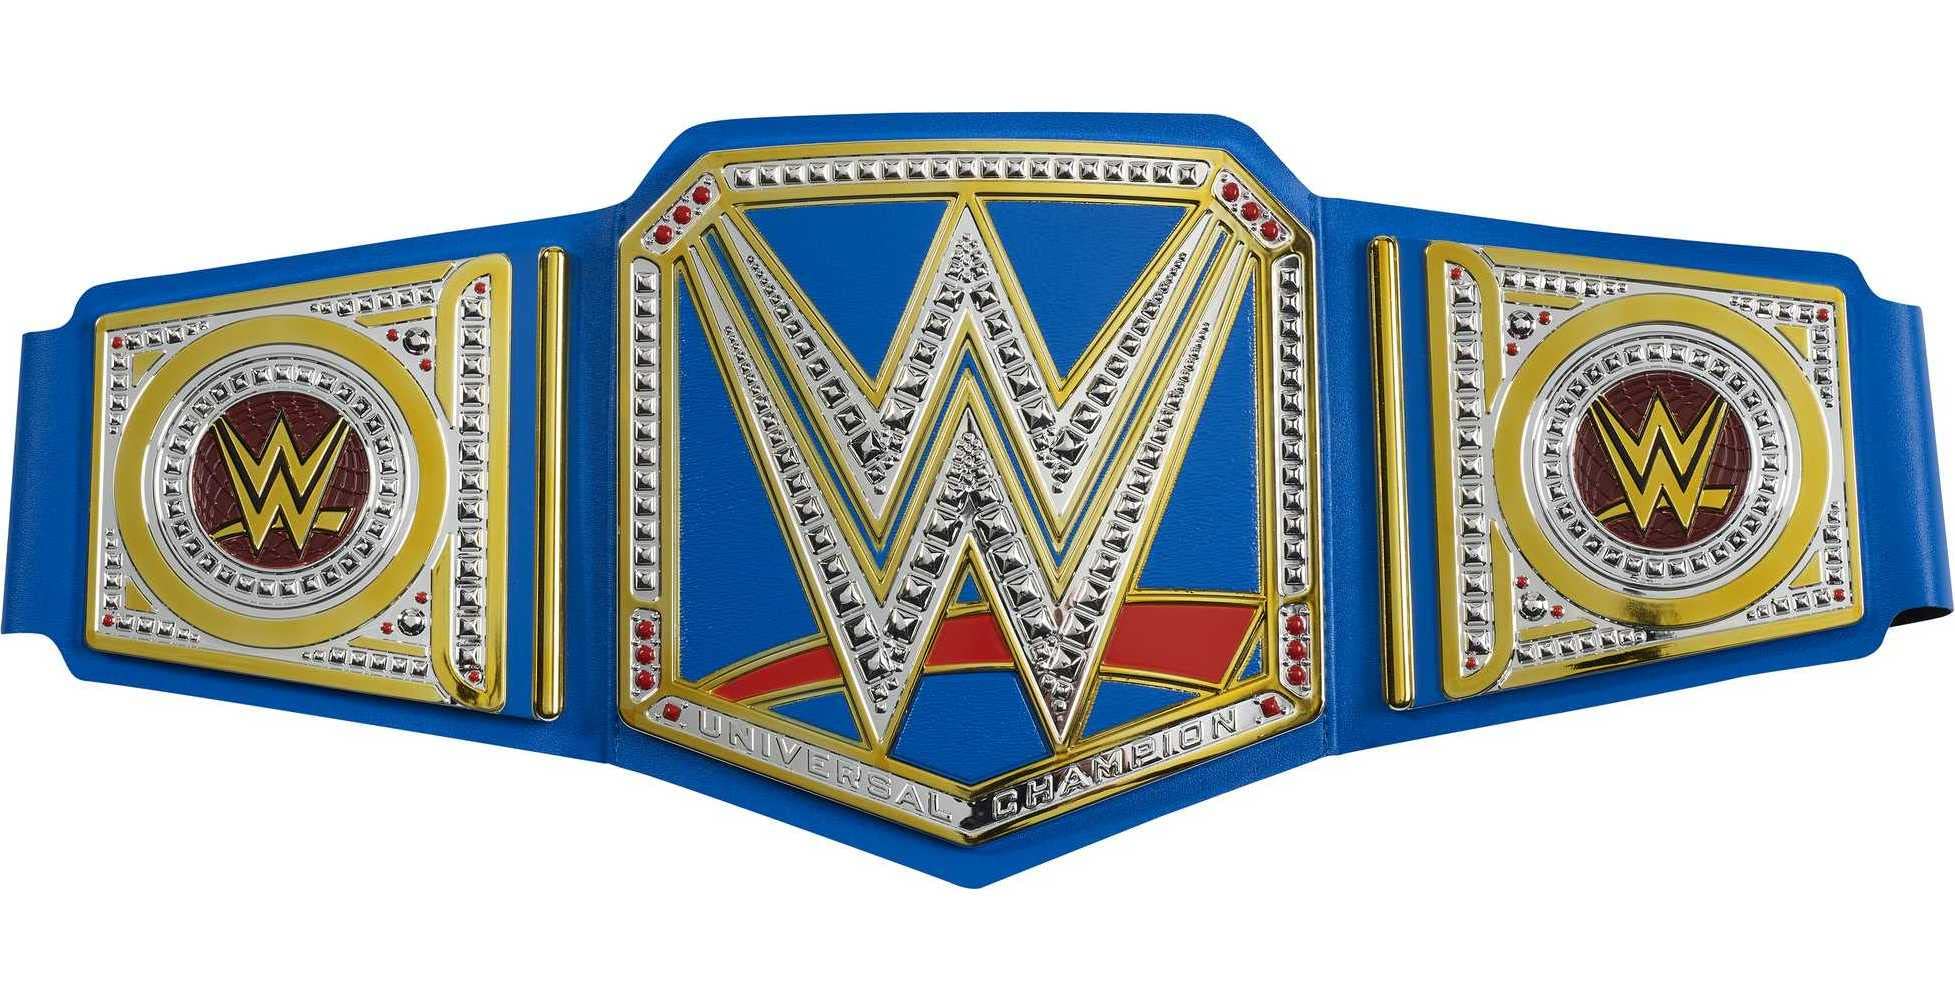 Mattel WWE Universal Championship Title Belt w/ Metallic Sideplates & Adjustable Strap $11 + Free Shipping w/ Prime or on orders over $35